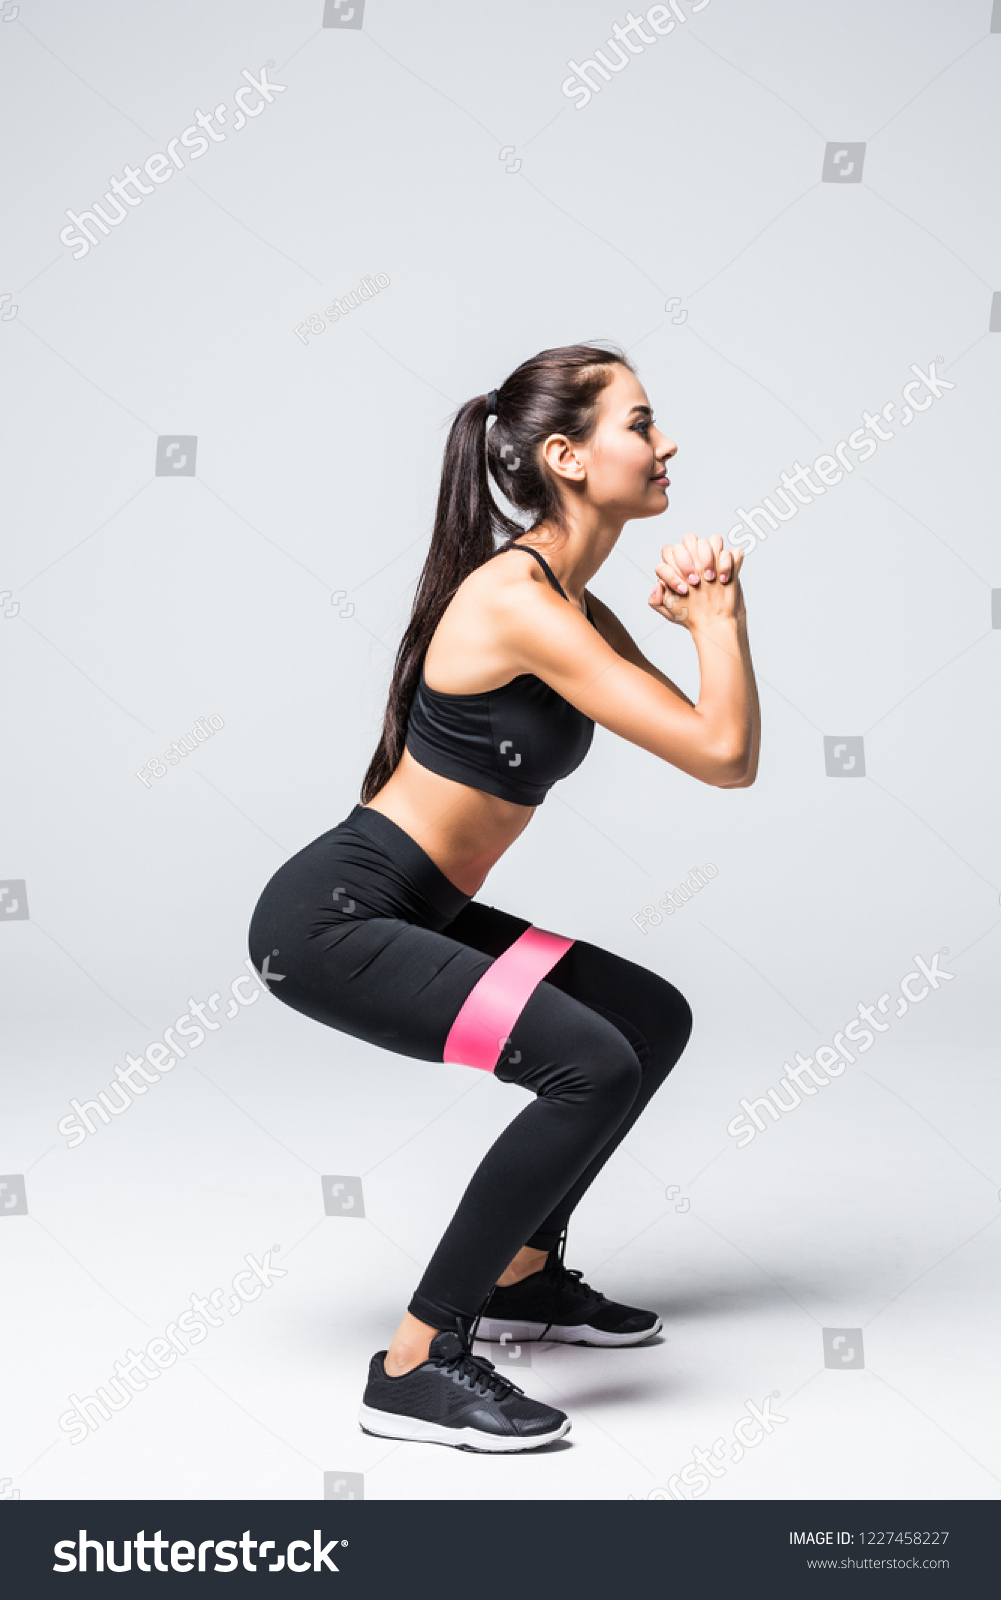 slim blonde woman doing squats with fitness loop band isolated on white background #1227458227